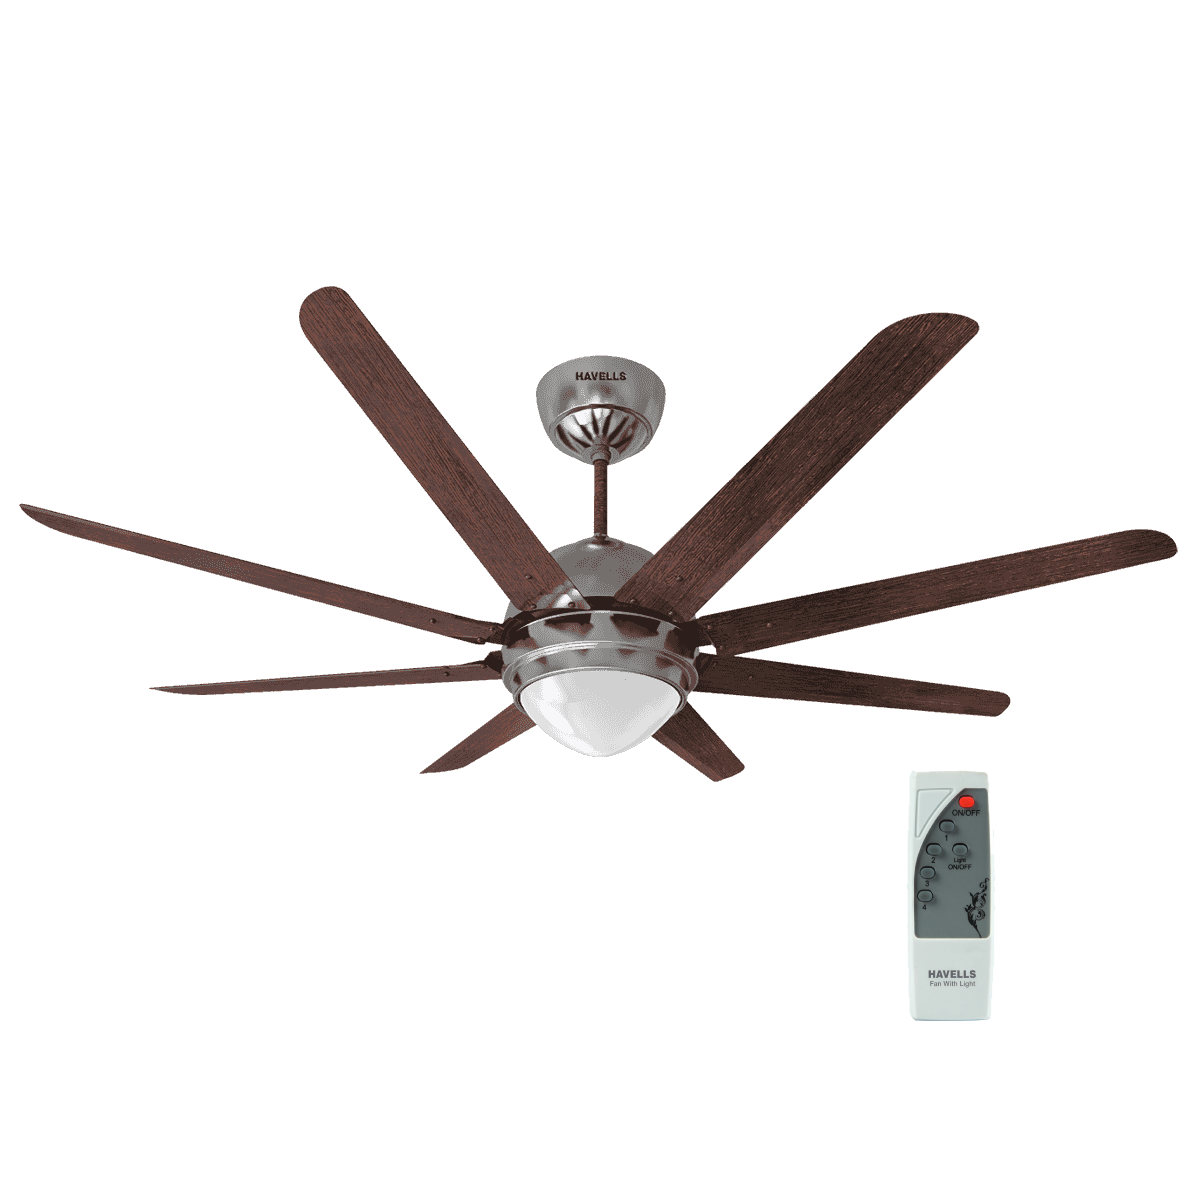 Havells 8 Blade Ceiling Fan 1320mm with Under Light OCTET UL